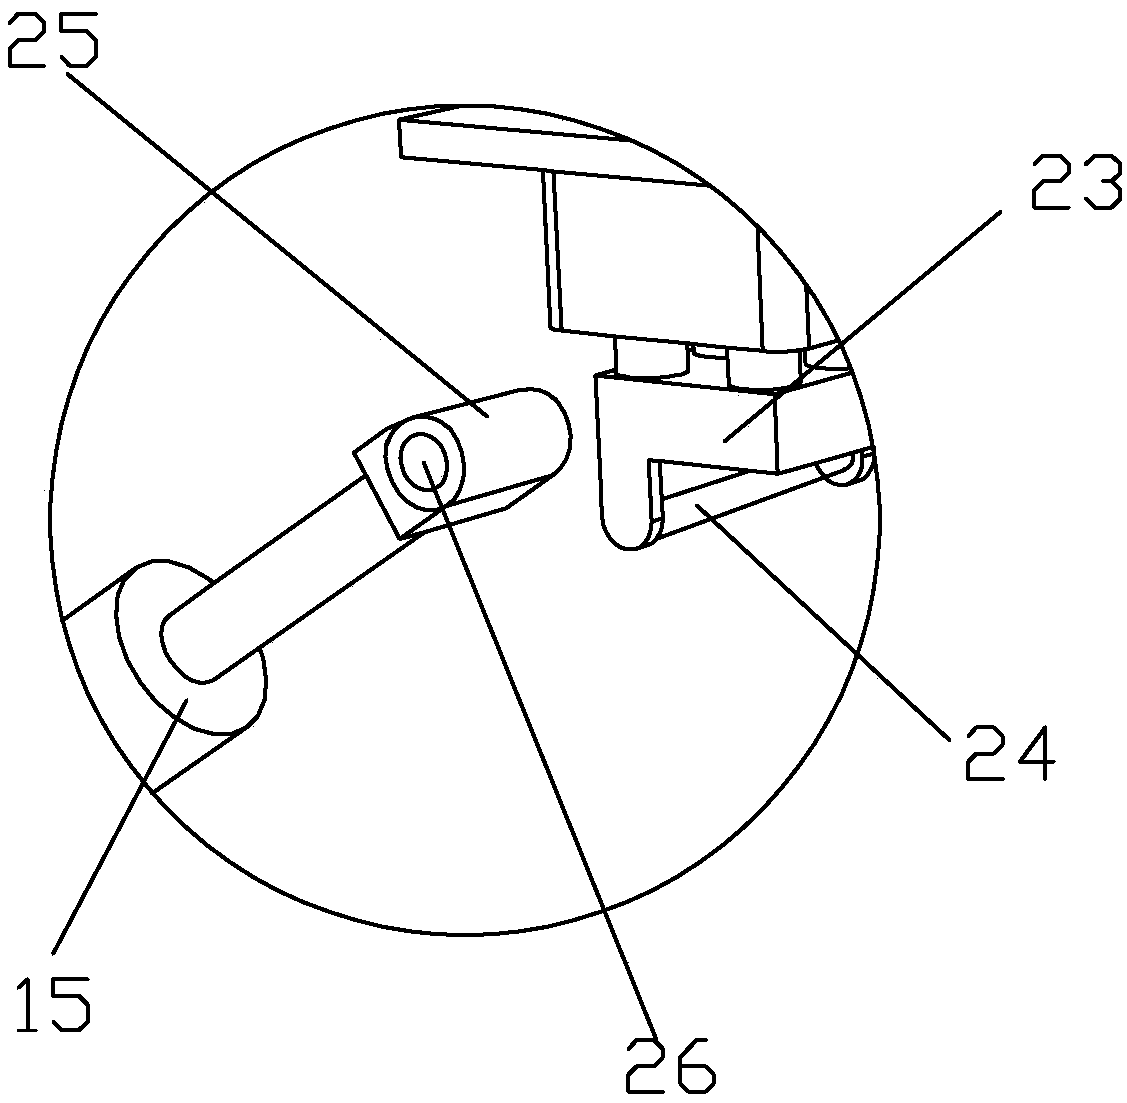 Connecting centering device for pipeline engineering